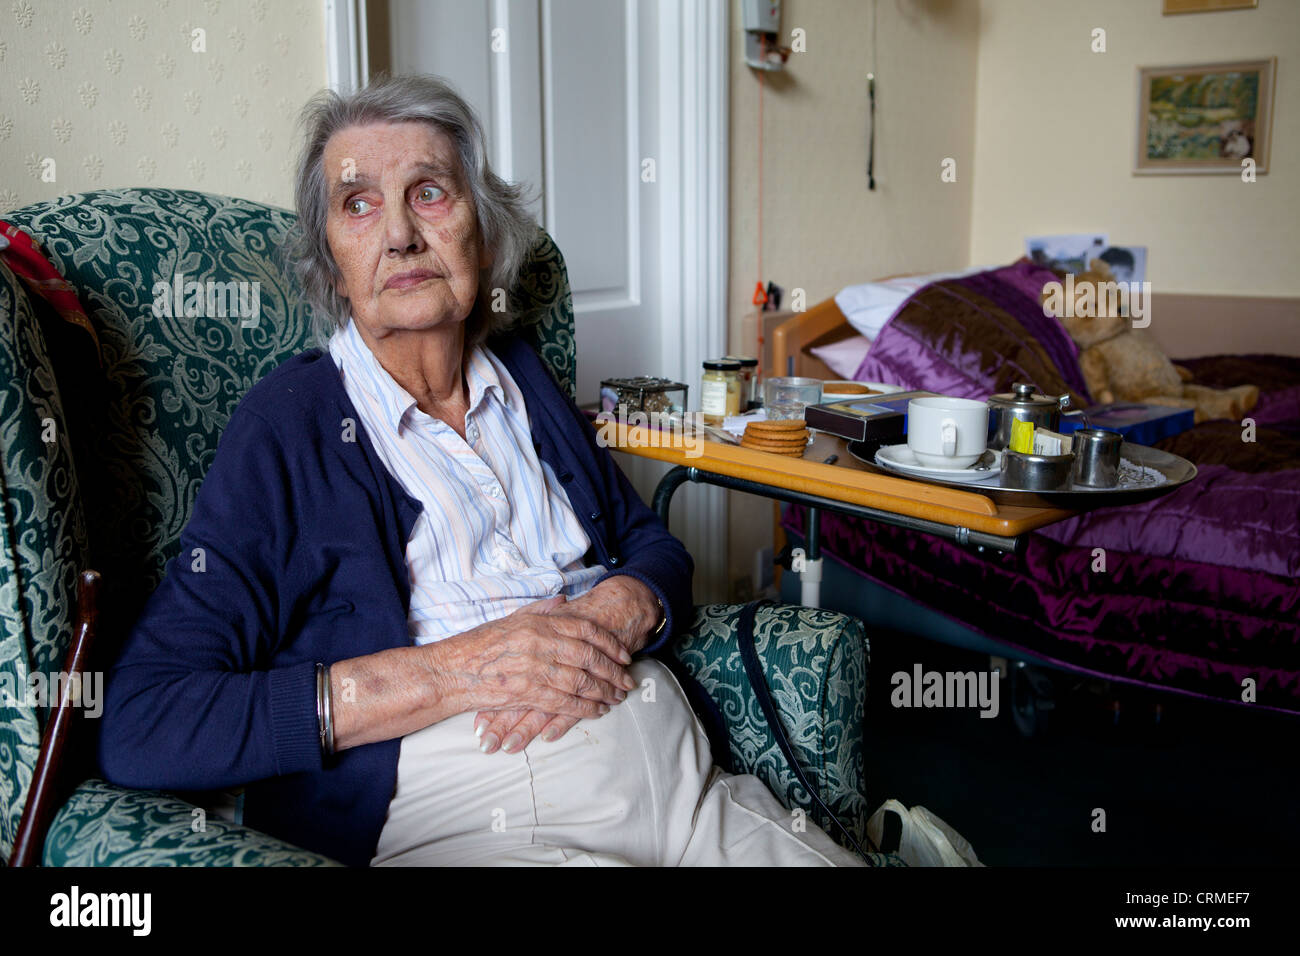 Sad elderly woman in a care home. Stock Photo